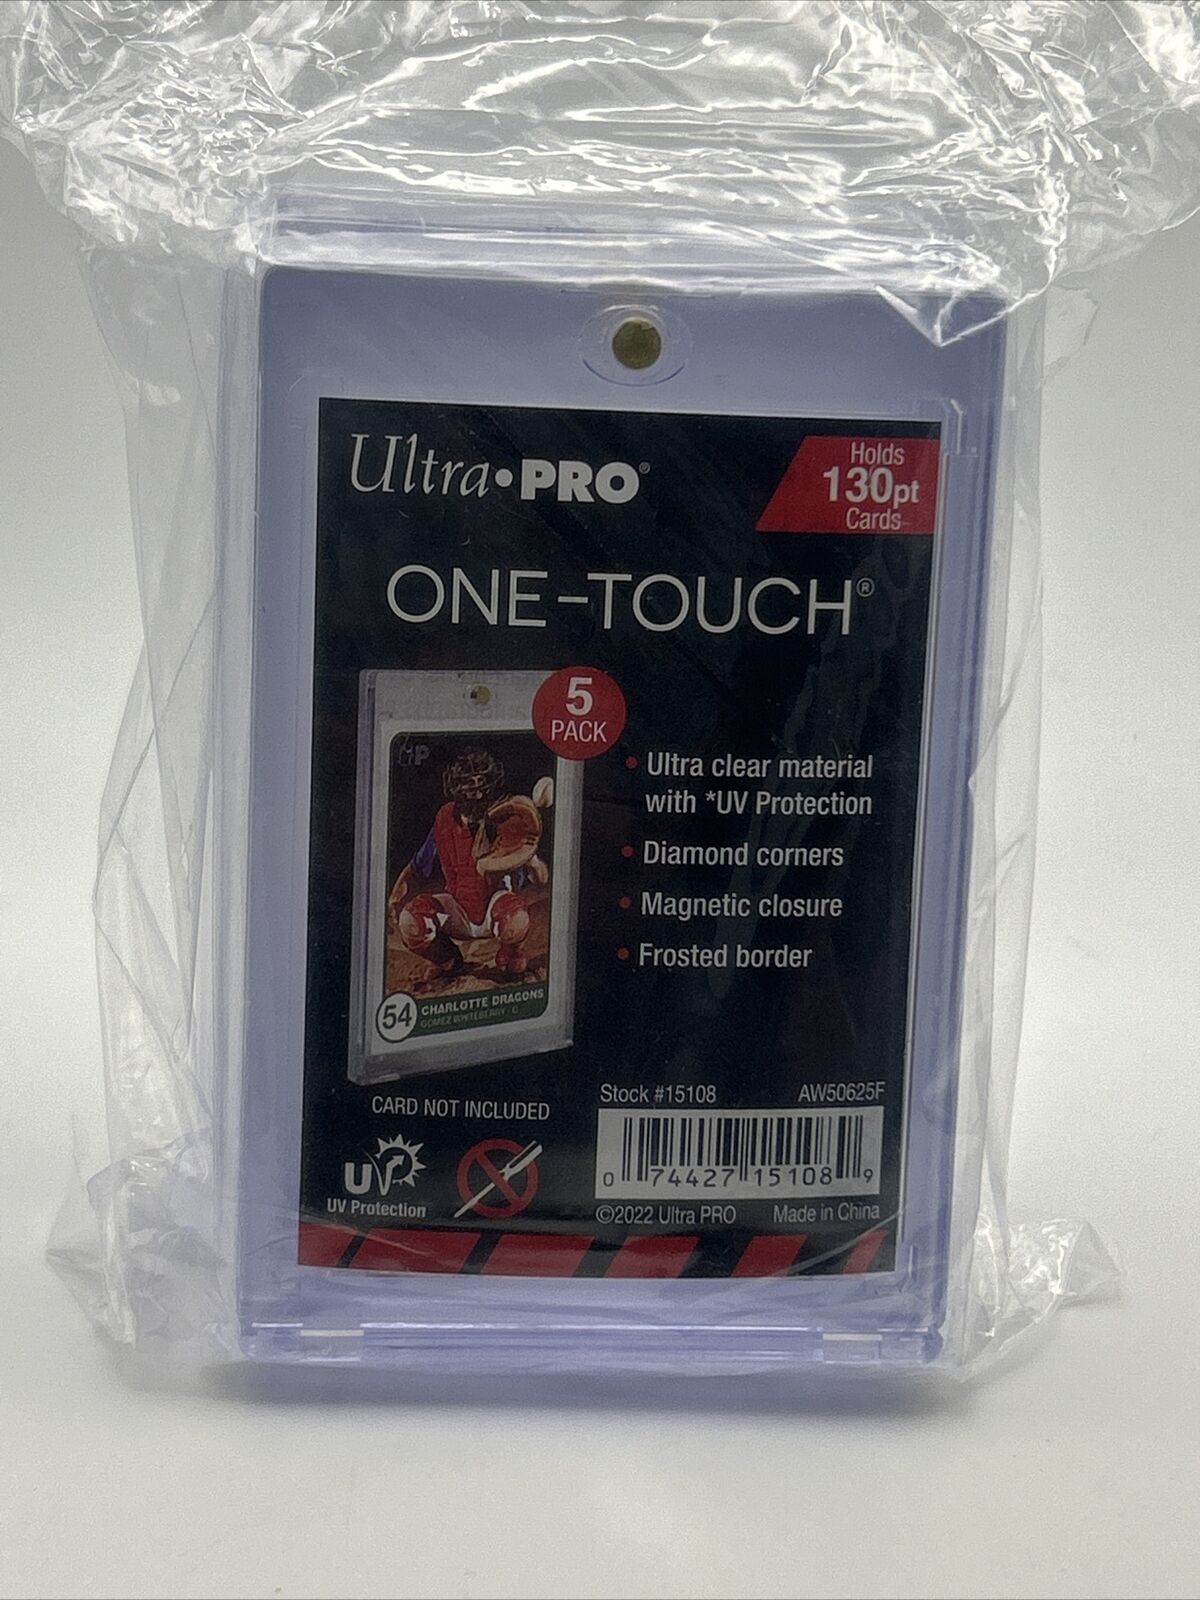 Ultra Pro One-Touch Thick Card 130pt Point Magnetic Card Holder - 5 PACK